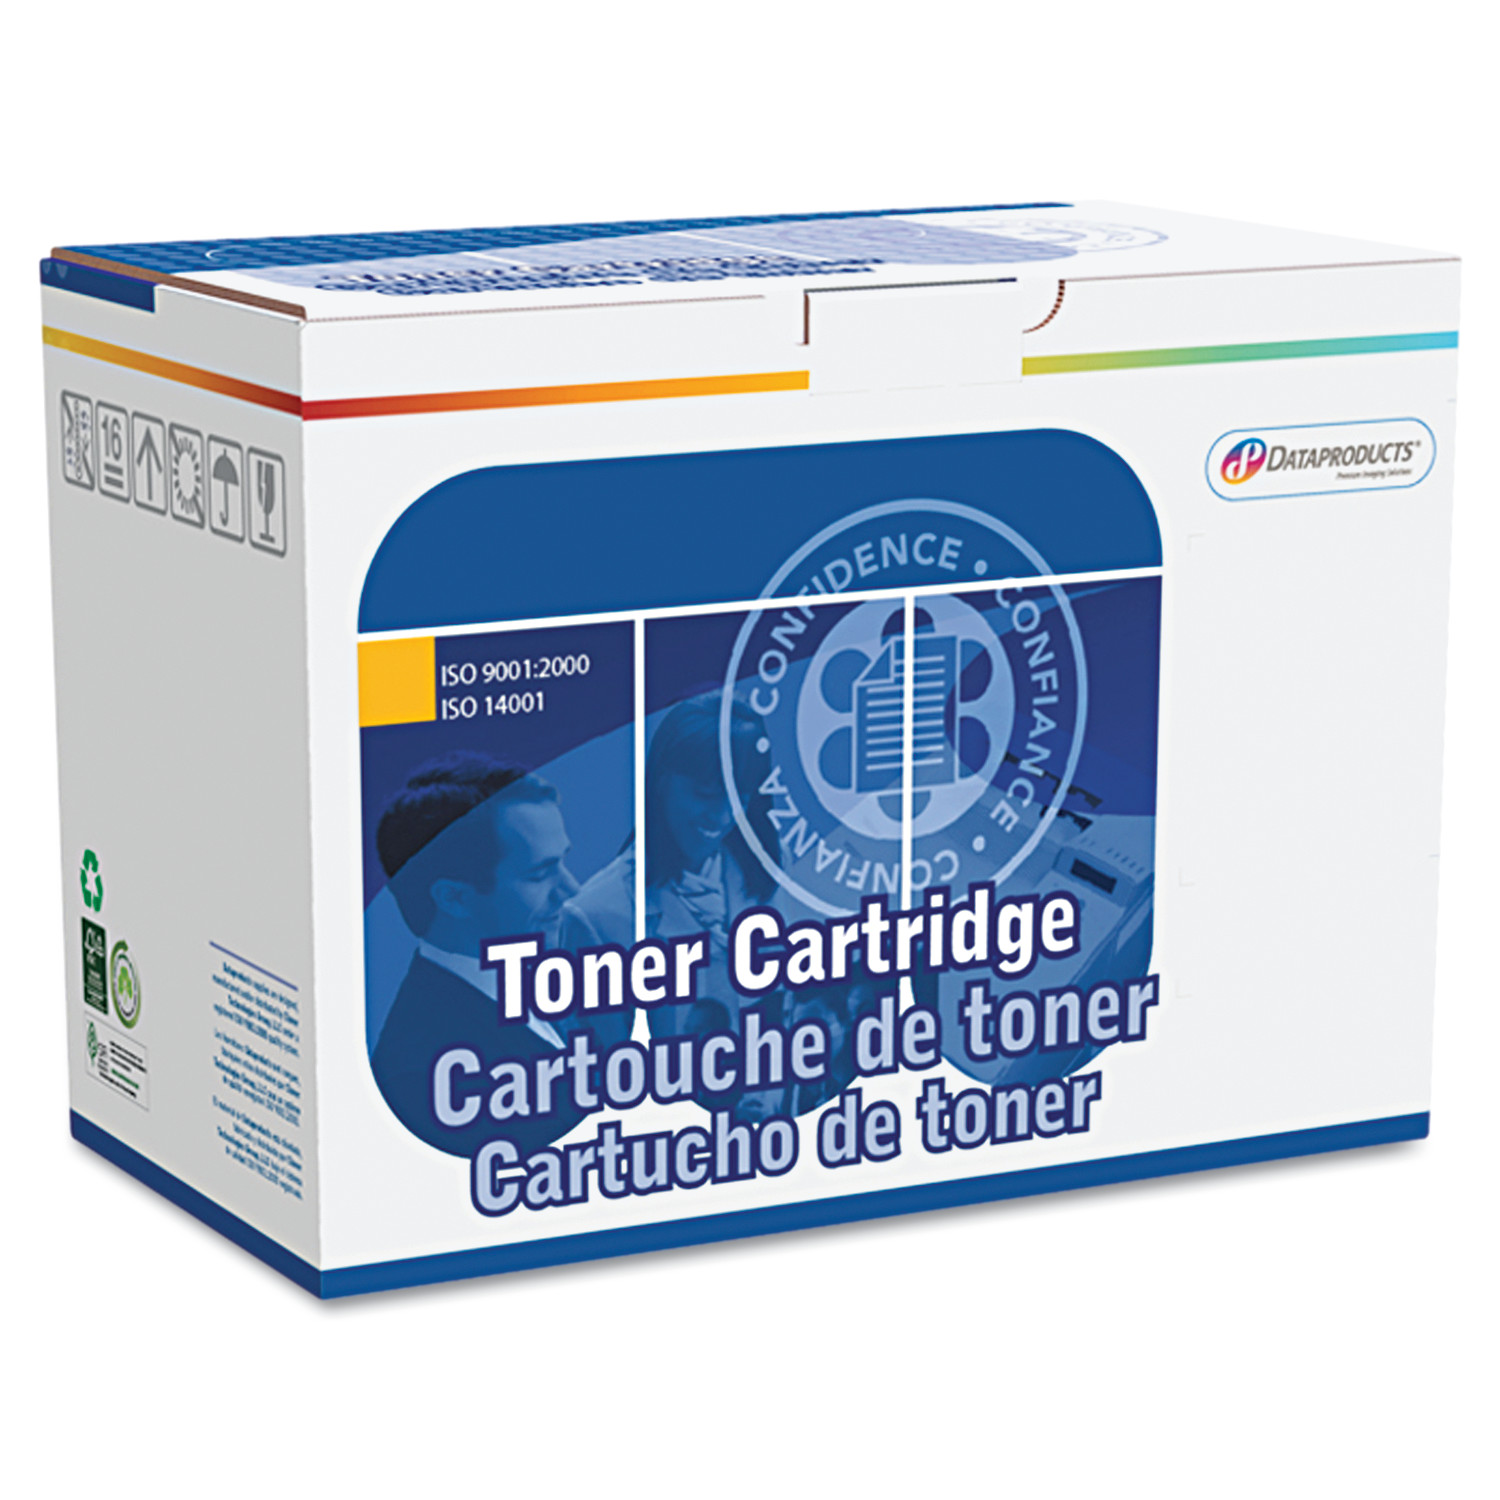 Dataproducts Remanufactured CC531A (304A) Toner, 2,800 Page-Yield, Cyan - image 1 of 2